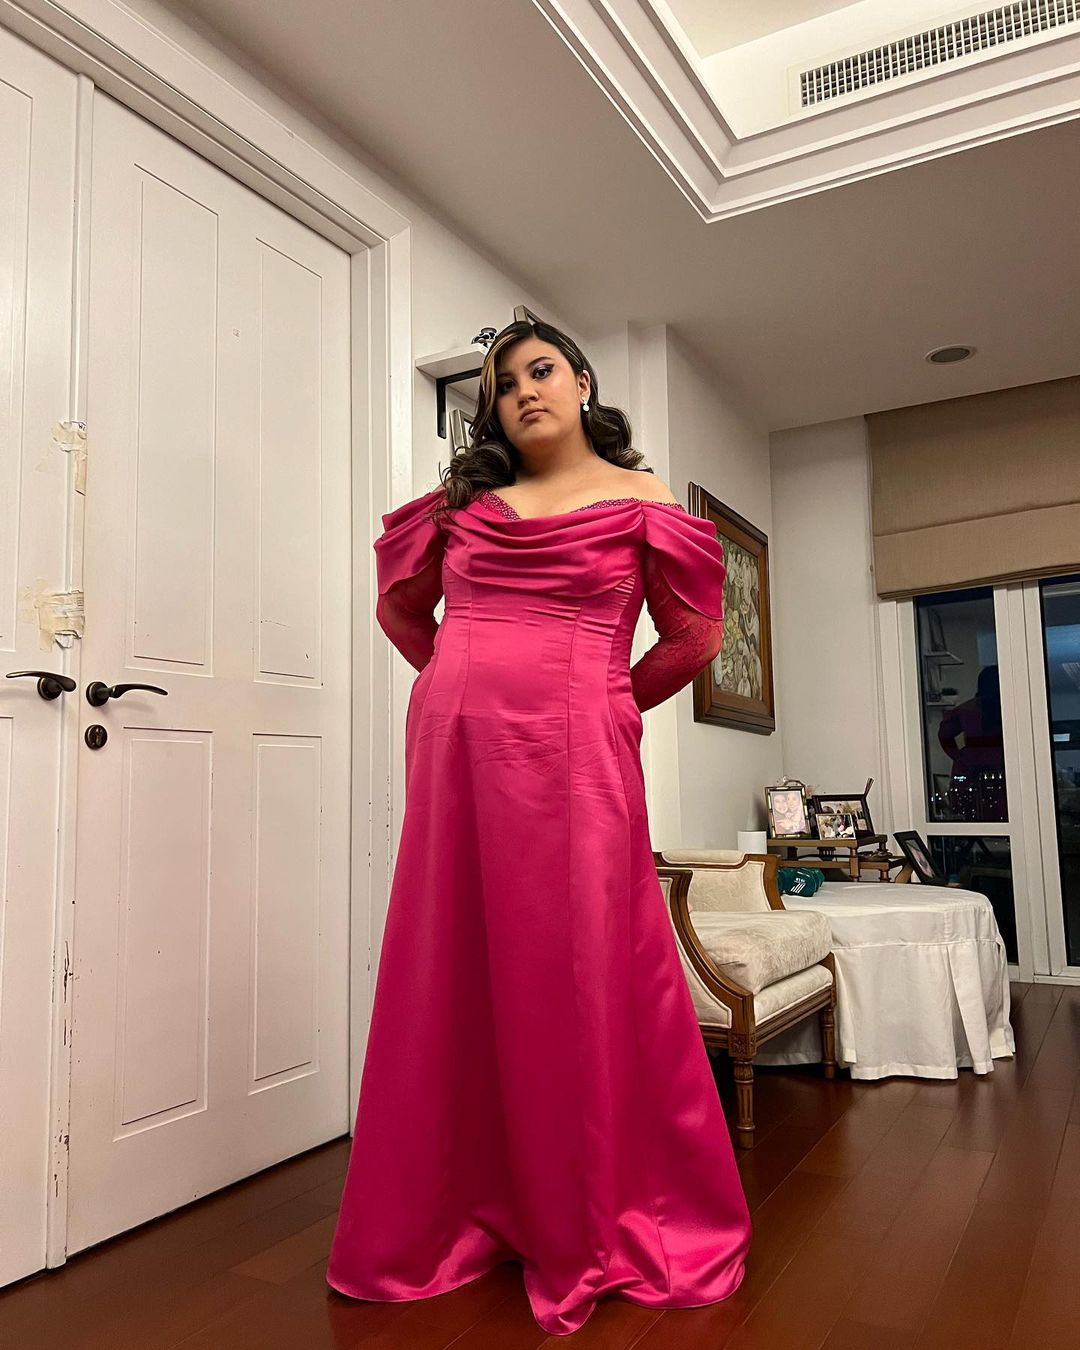 Miel Pangilinan in her prom gown